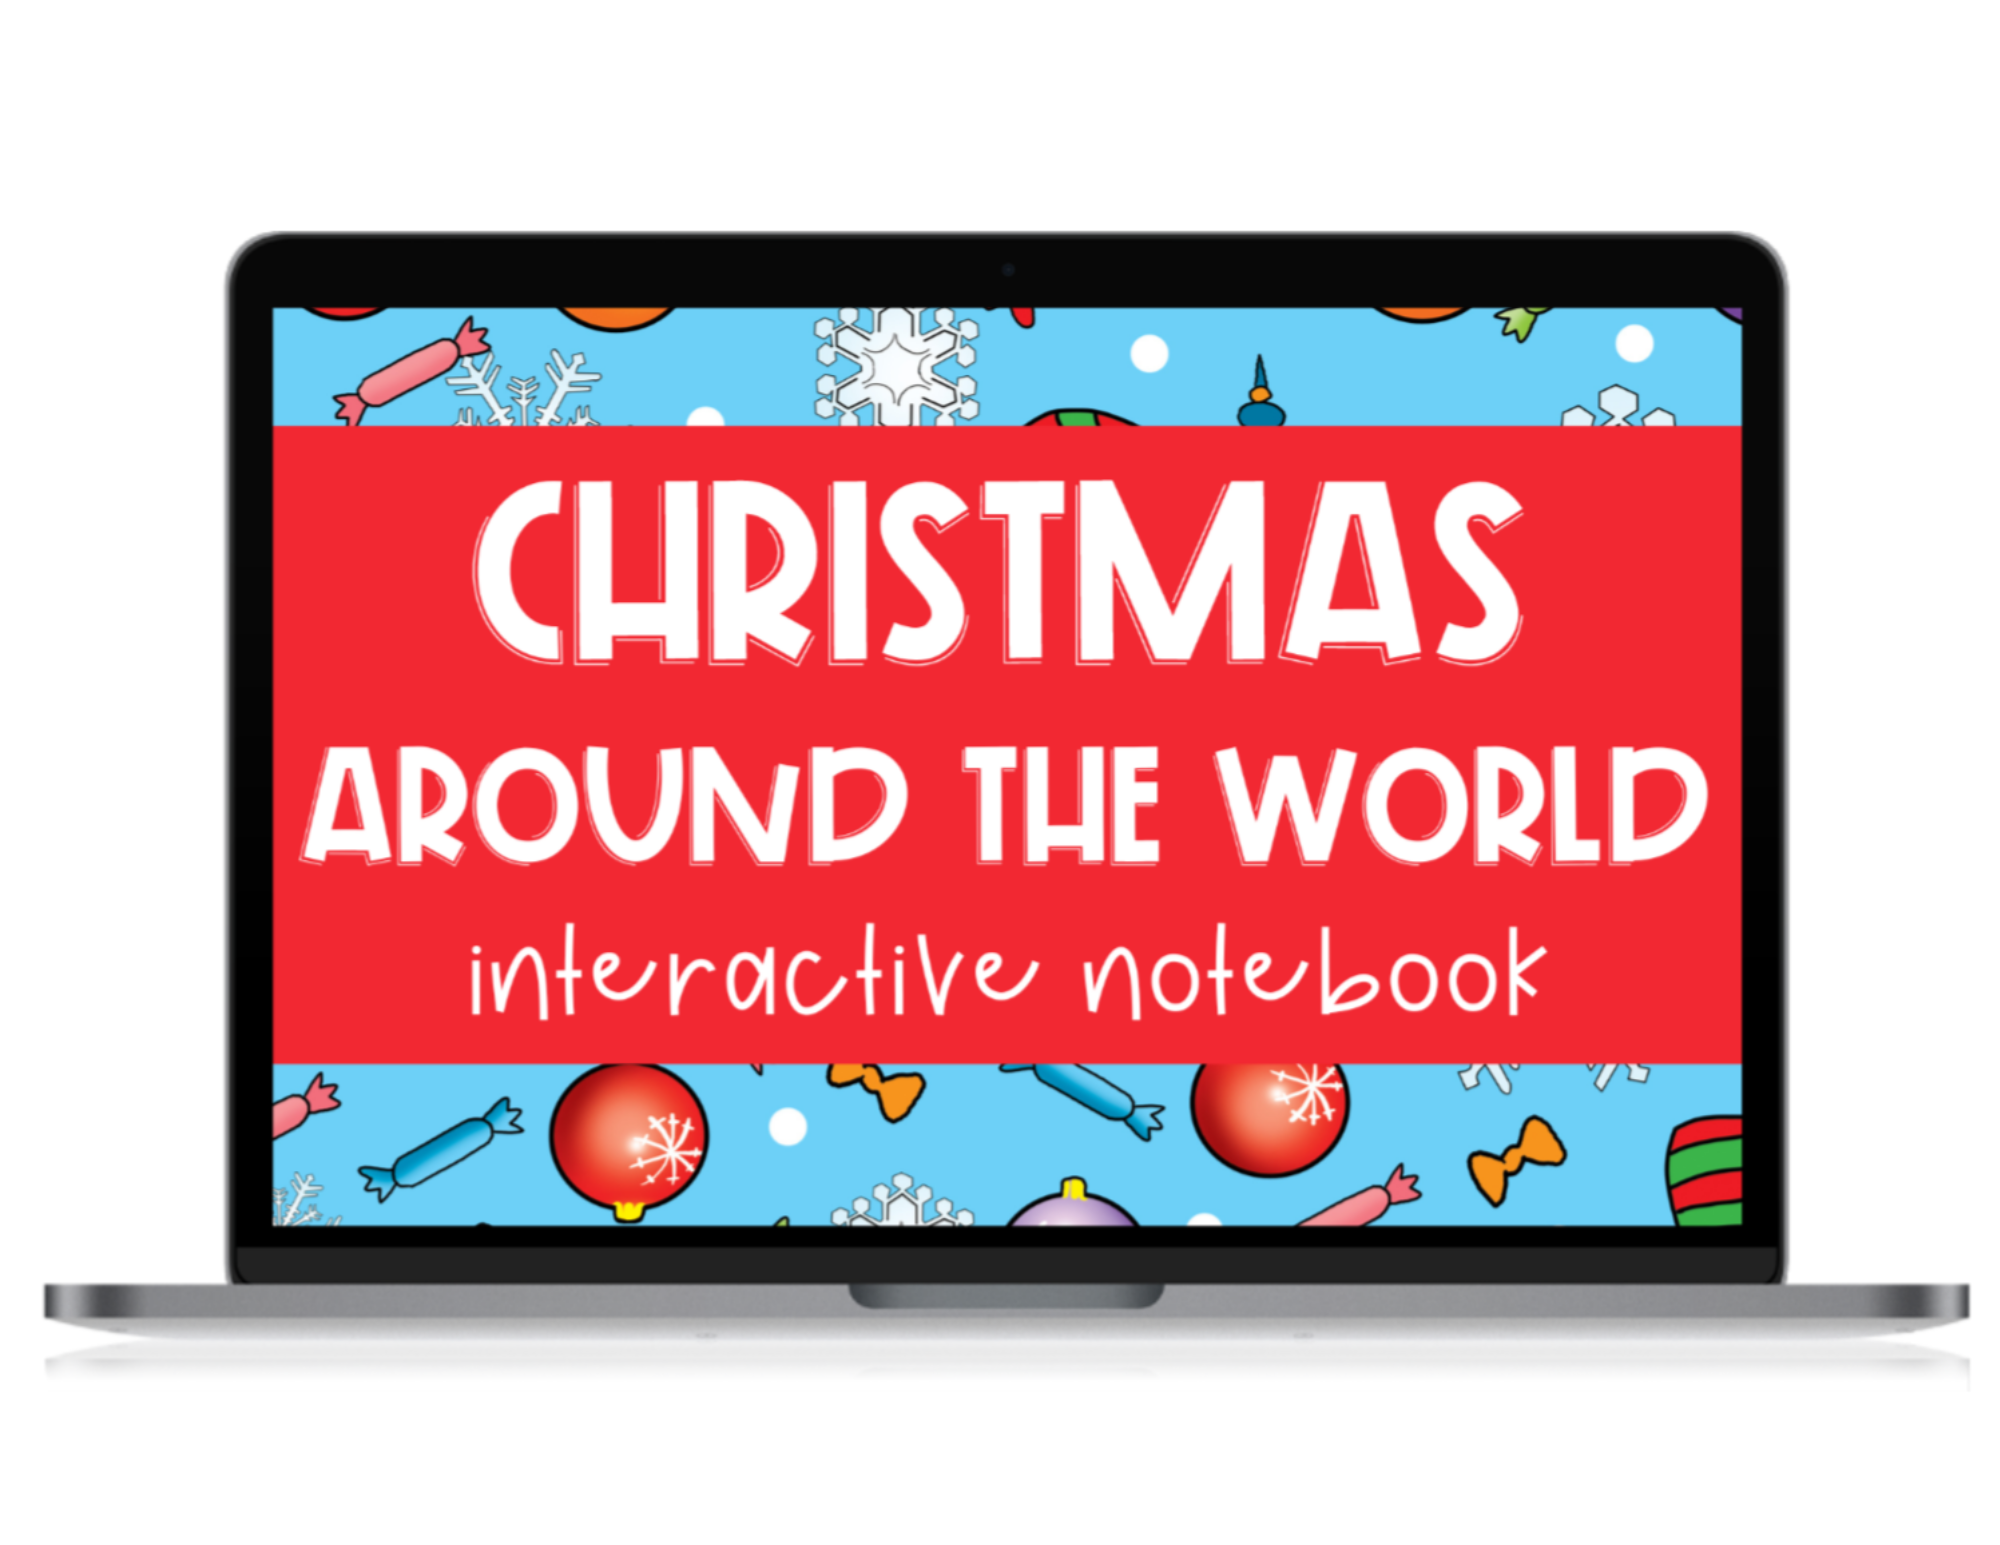 Christmas around the world learning activities